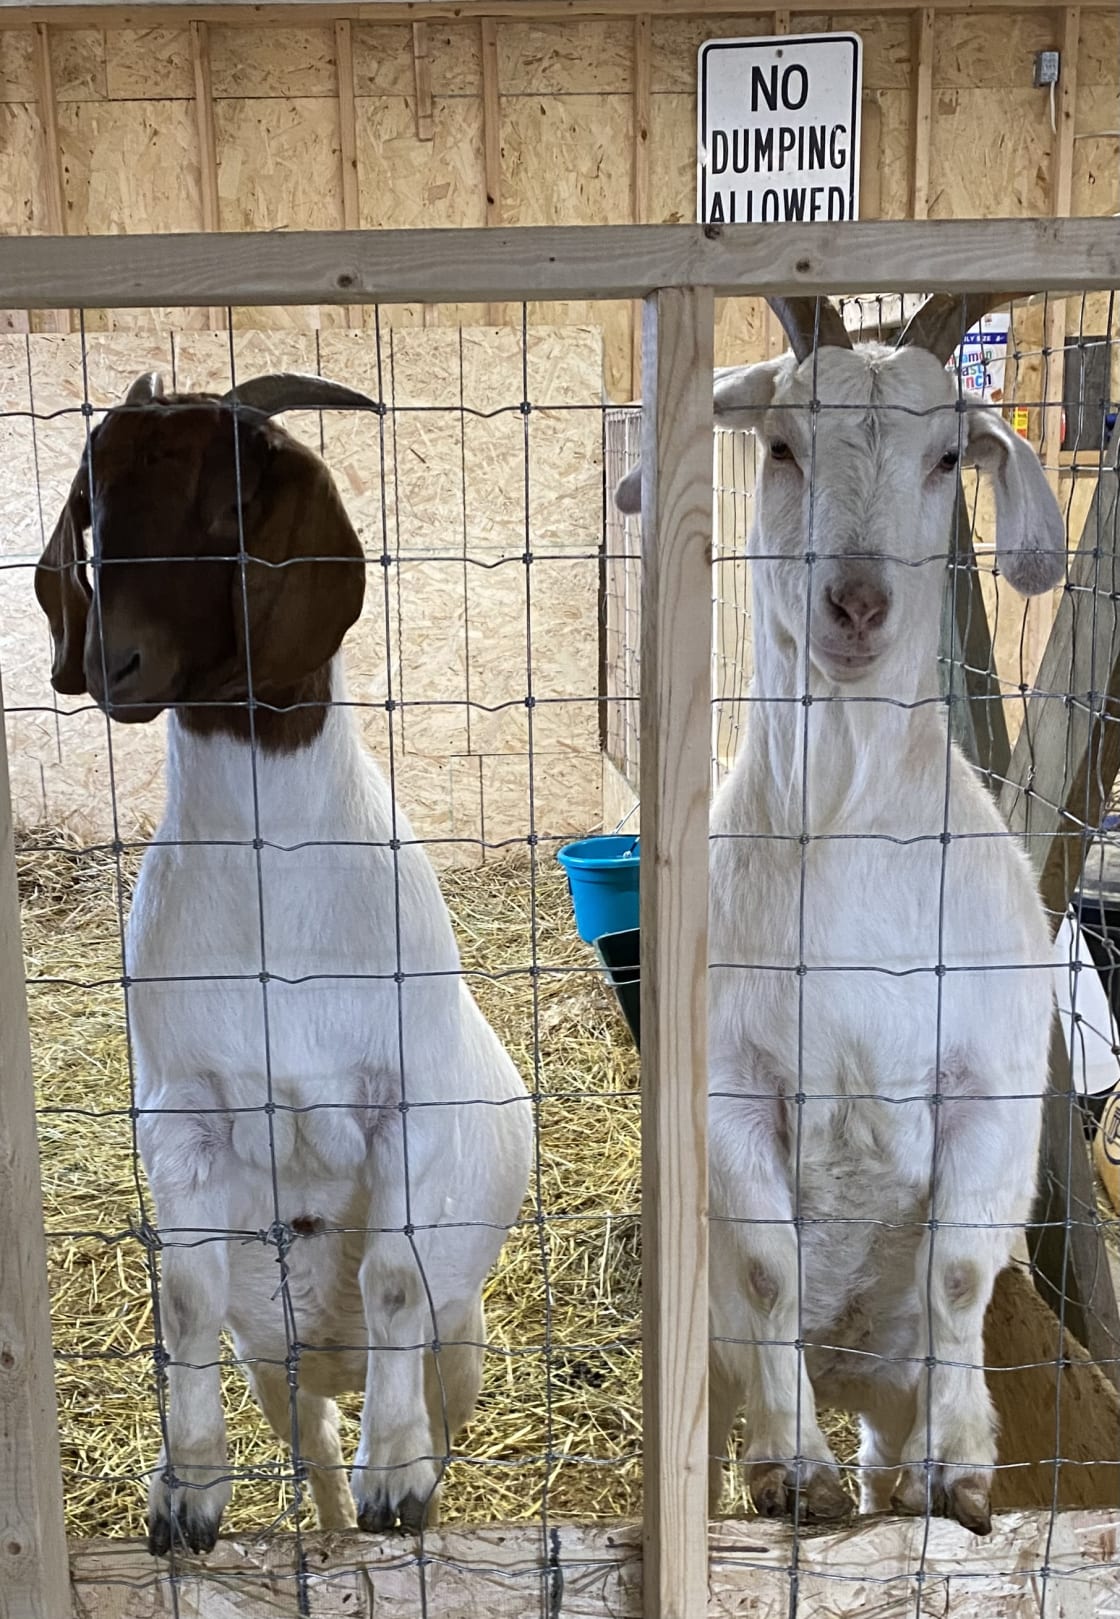 Sally (brown face) and Sugar (all white) are our friendly goats. They are typically outside in their pen waiting to yell at visitors for attention. 